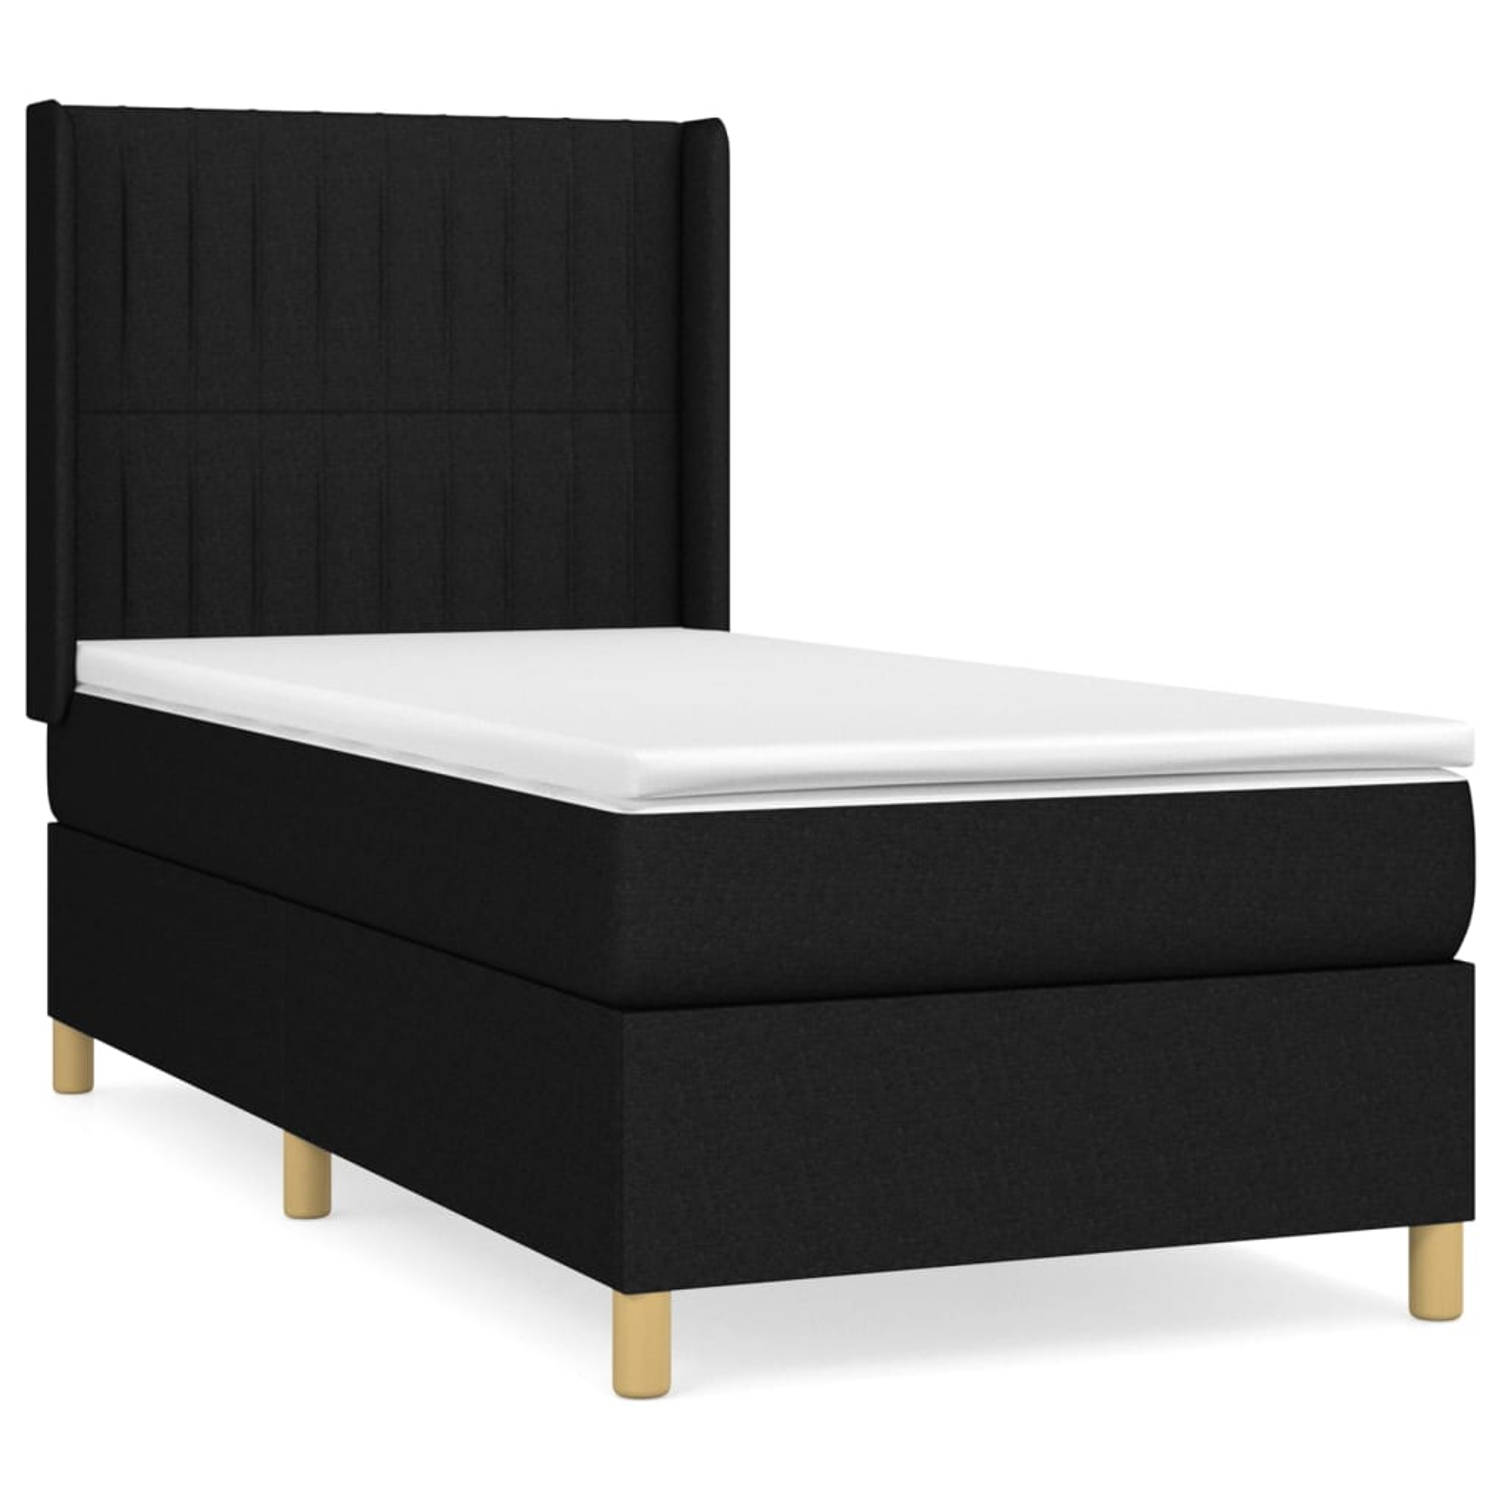 The Living Store Boxspring Bed - naam - 80 x 200 cm - Duurzaam materiaal